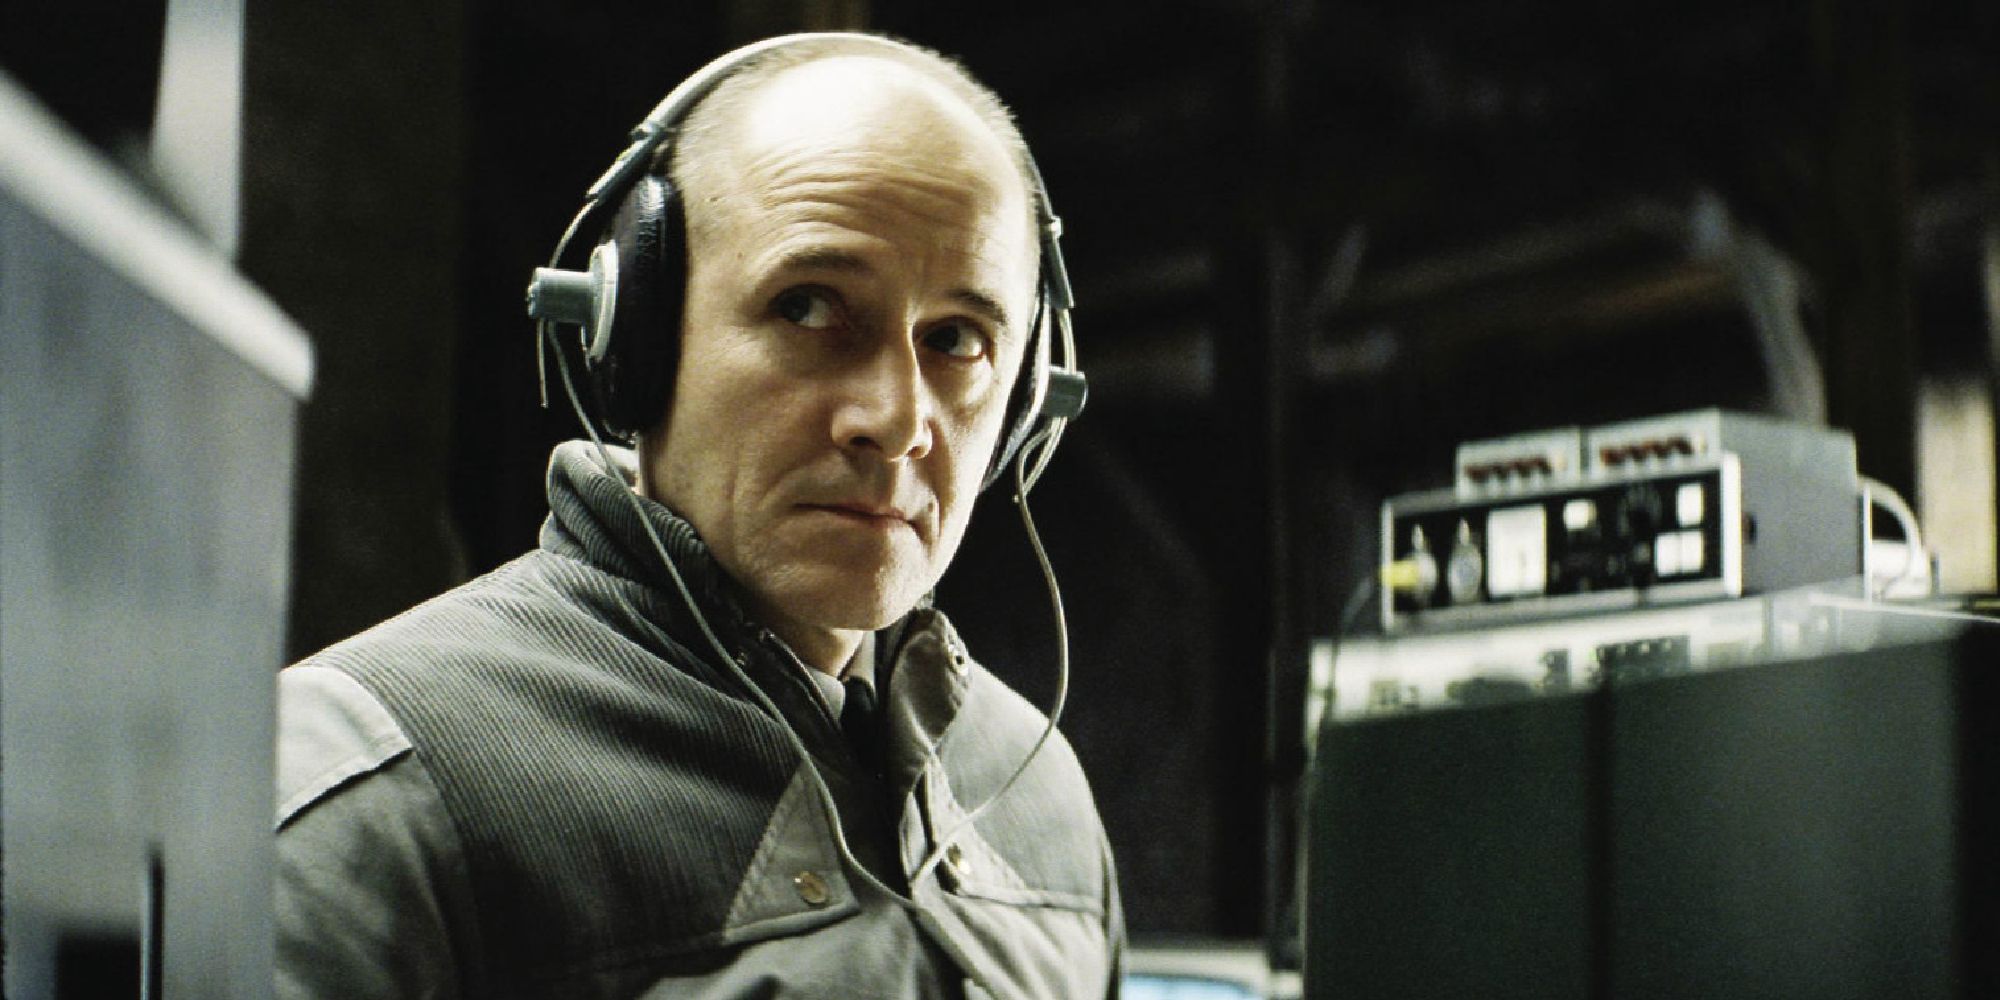 Ulrich Mühe with headphones on in 'The Lives of Others'